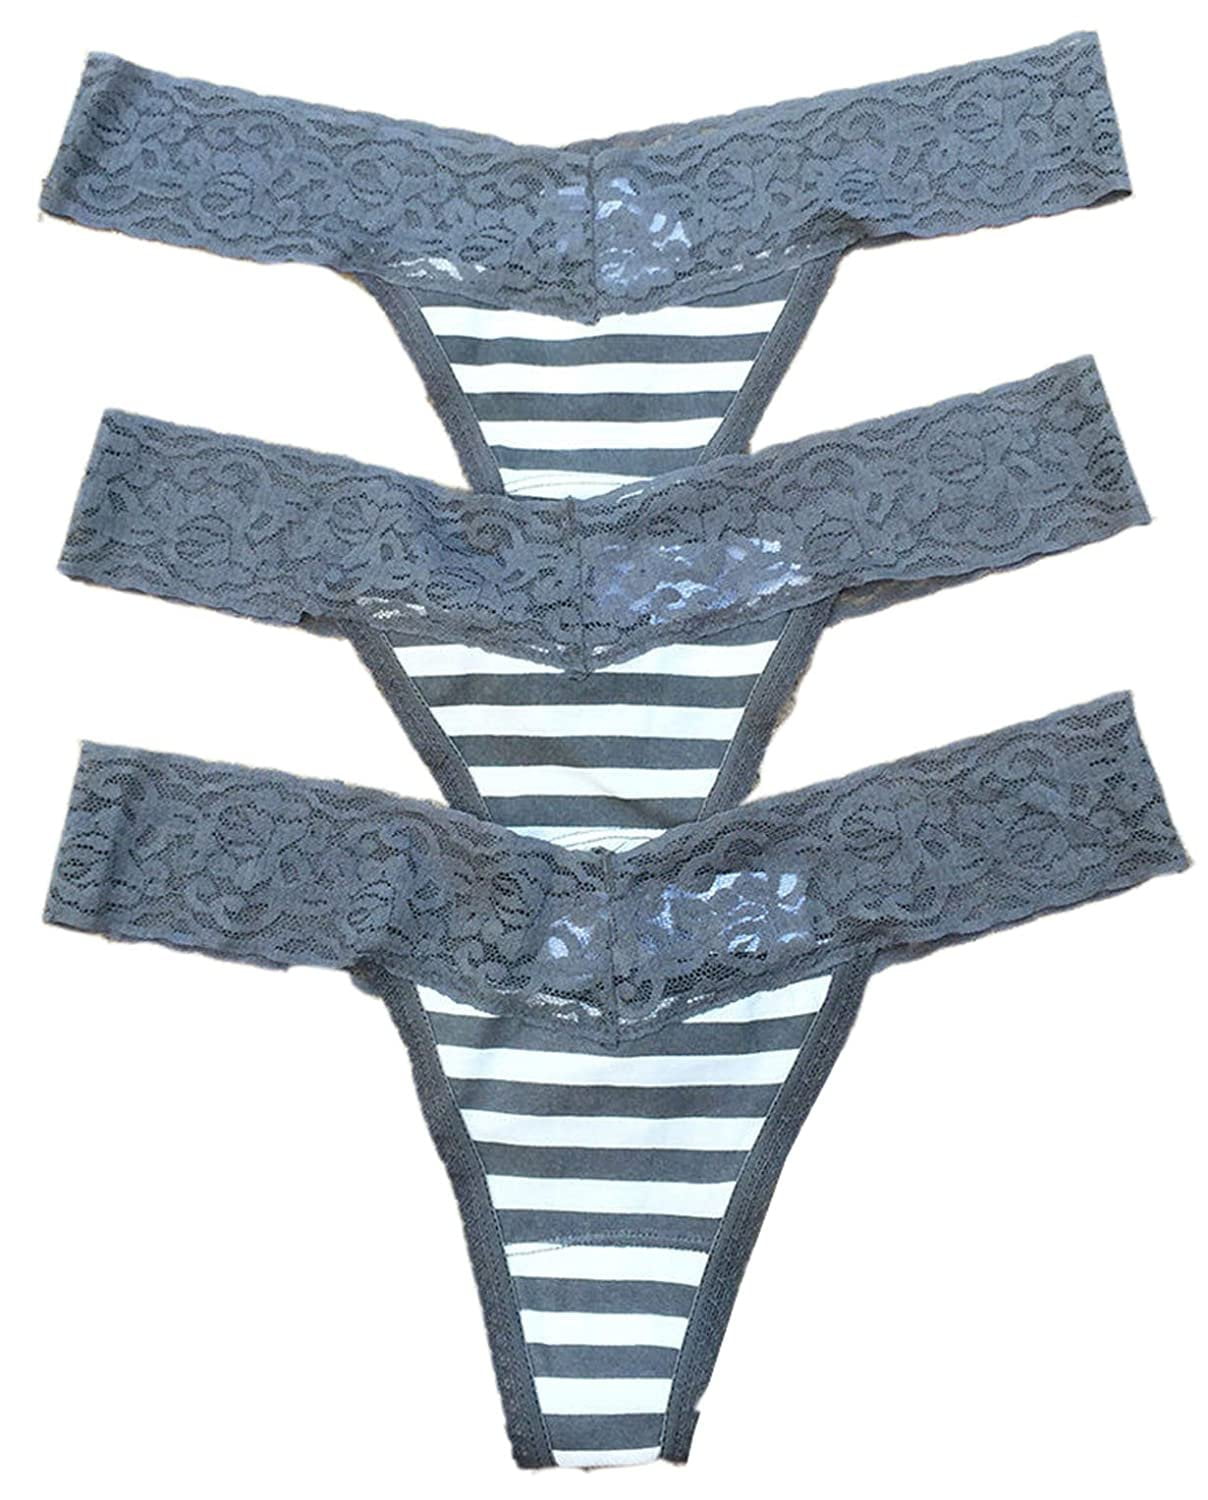 1 or 6 or 12 pieces Forever 21 Stripes Lace COTTON Thong Panty S/M/L (Gray)  (LARGE, 12 pieces Gray Thong) 